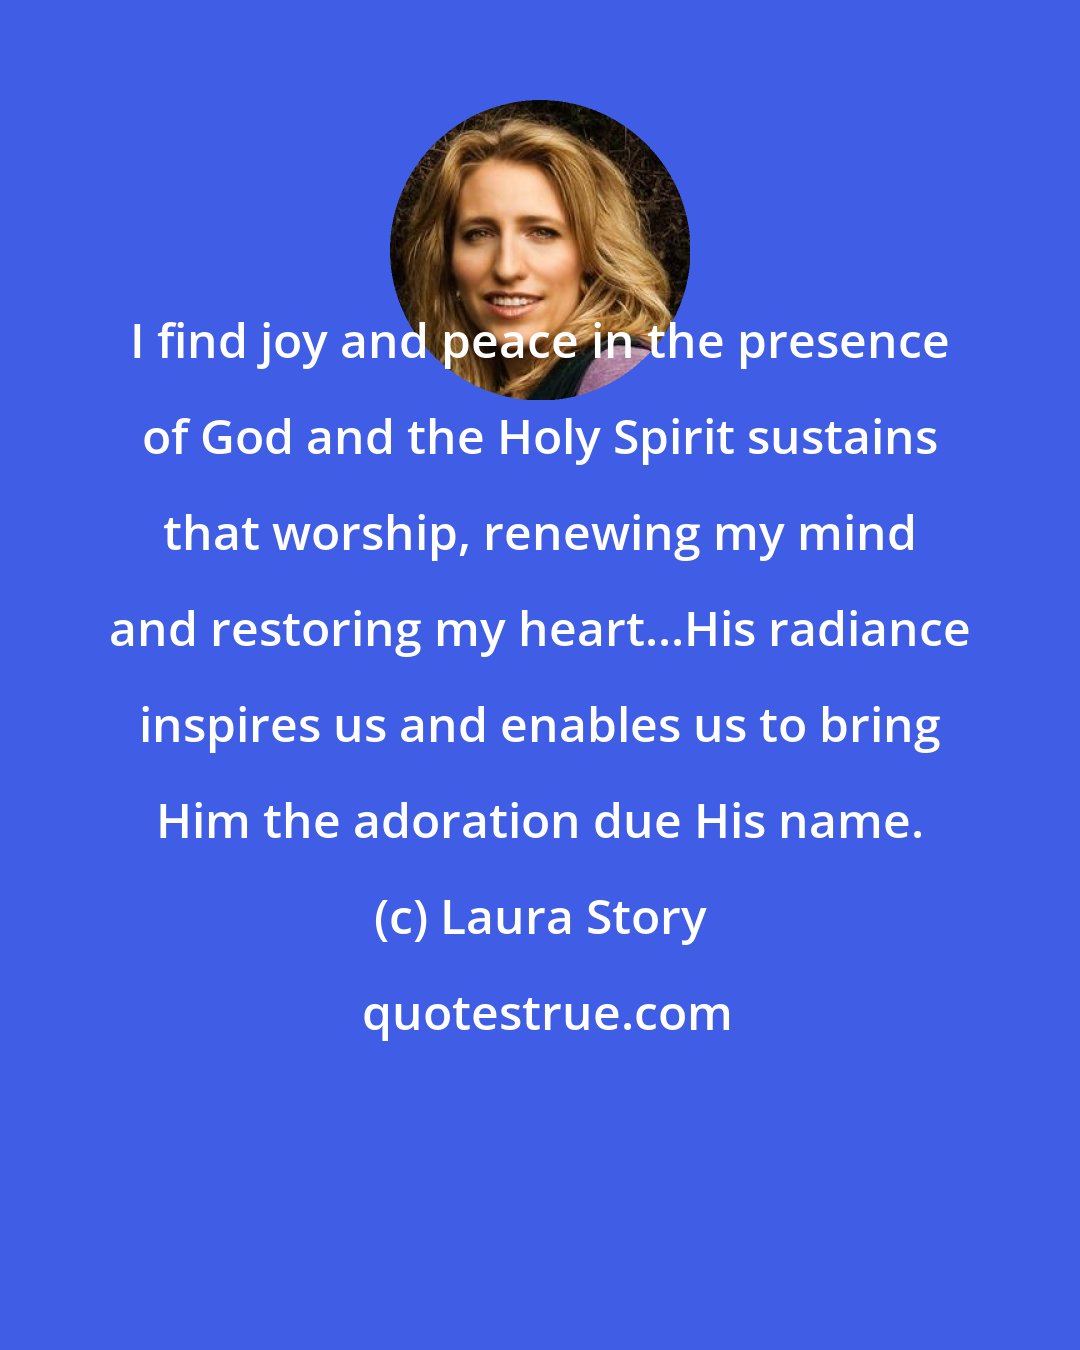 Laura Story: I find joy and peace in the presence of God and the Holy Spirit sustains that worship, renewing my mind and restoring my heart...His radiance inspires us and enables us to bring Him the adoration due His name.